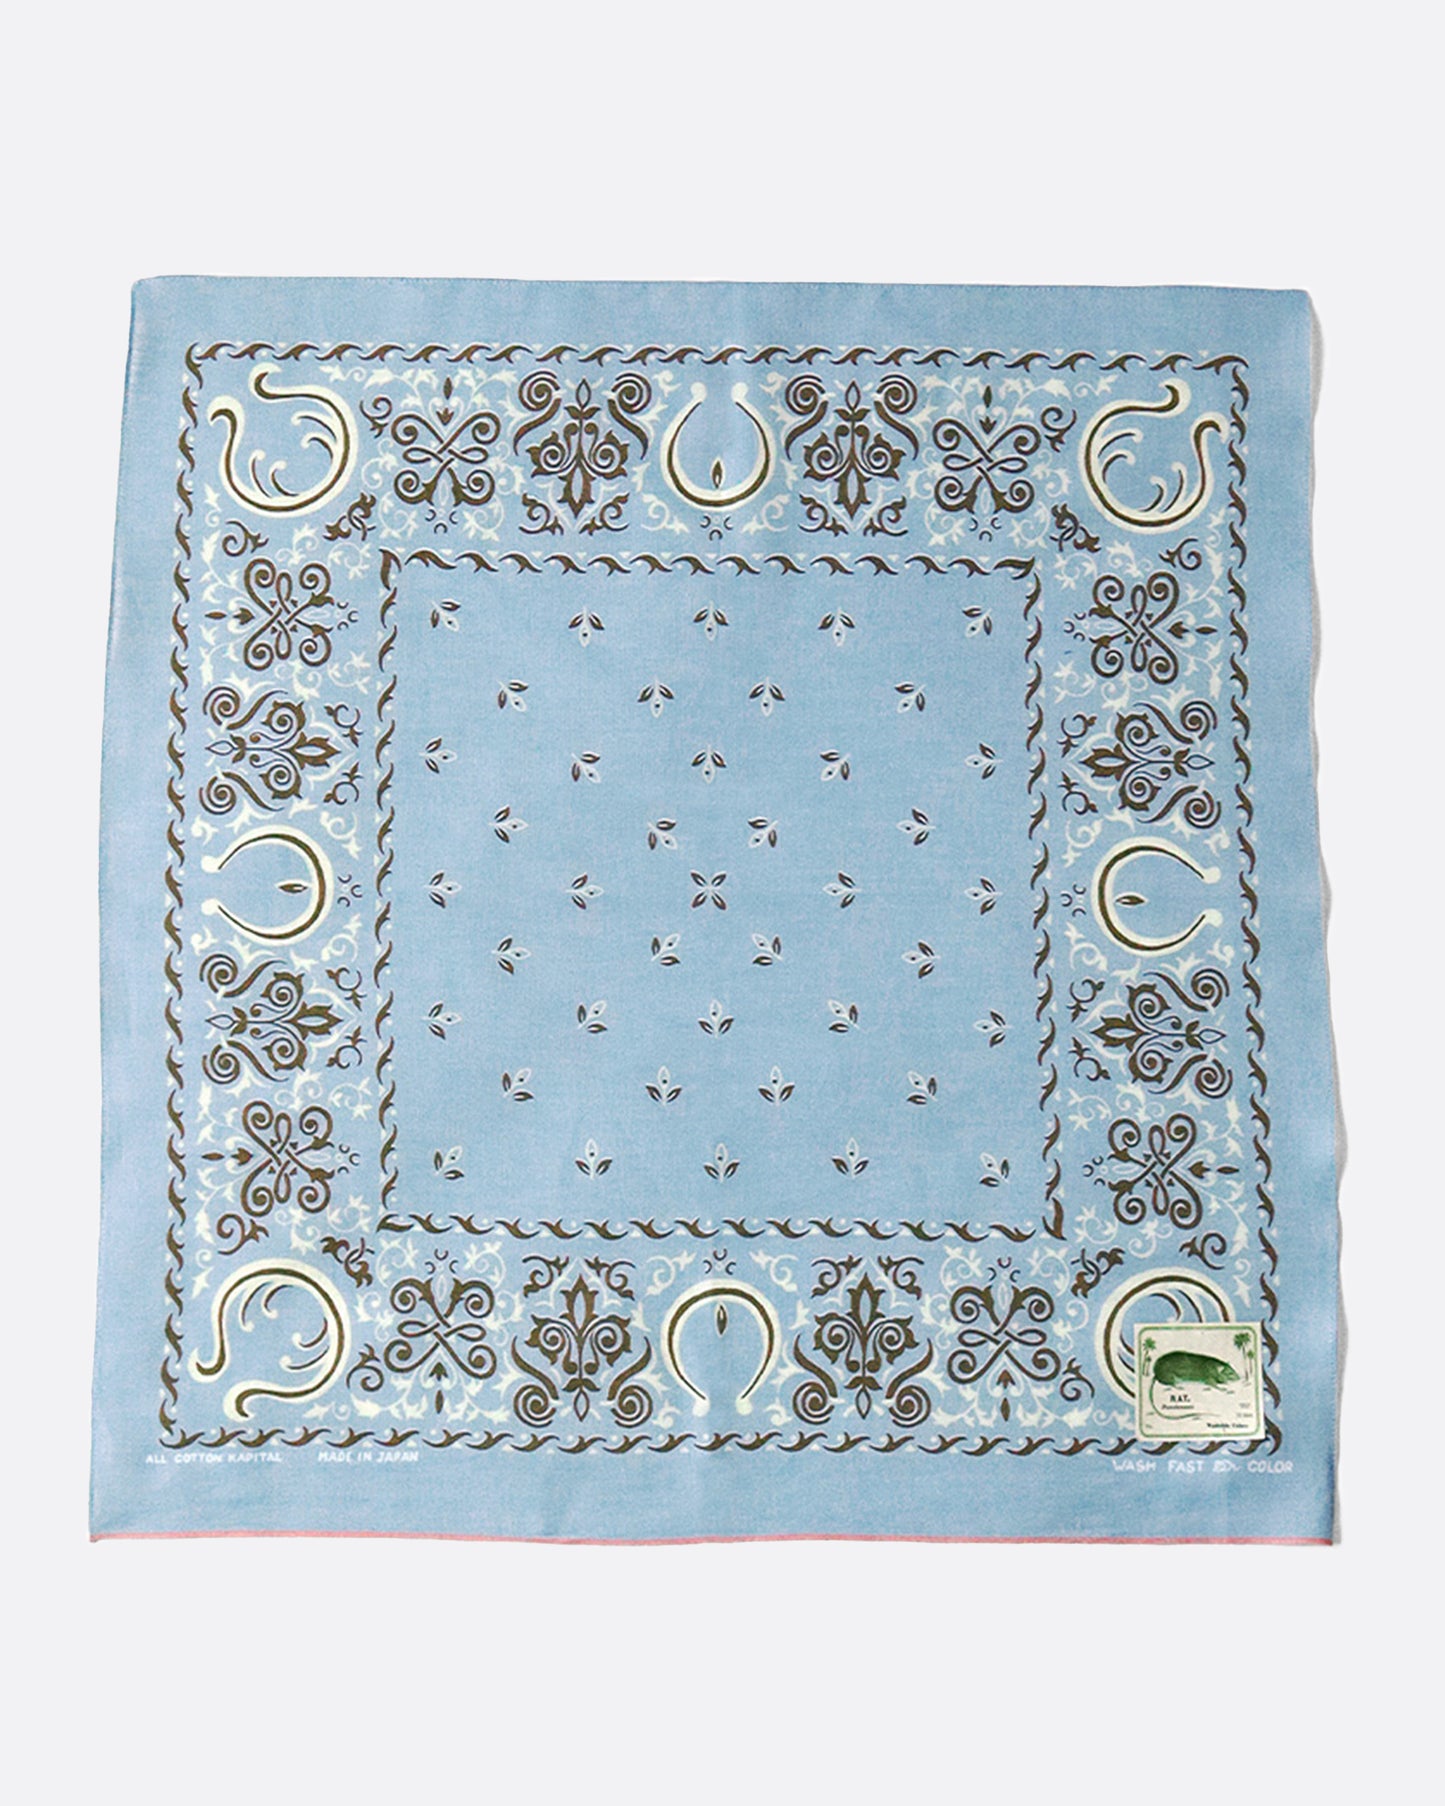 Printed with Native American najas, both traditional and those composed of antlers, this fastcolor selvedge bandana celebrates strength and creation.